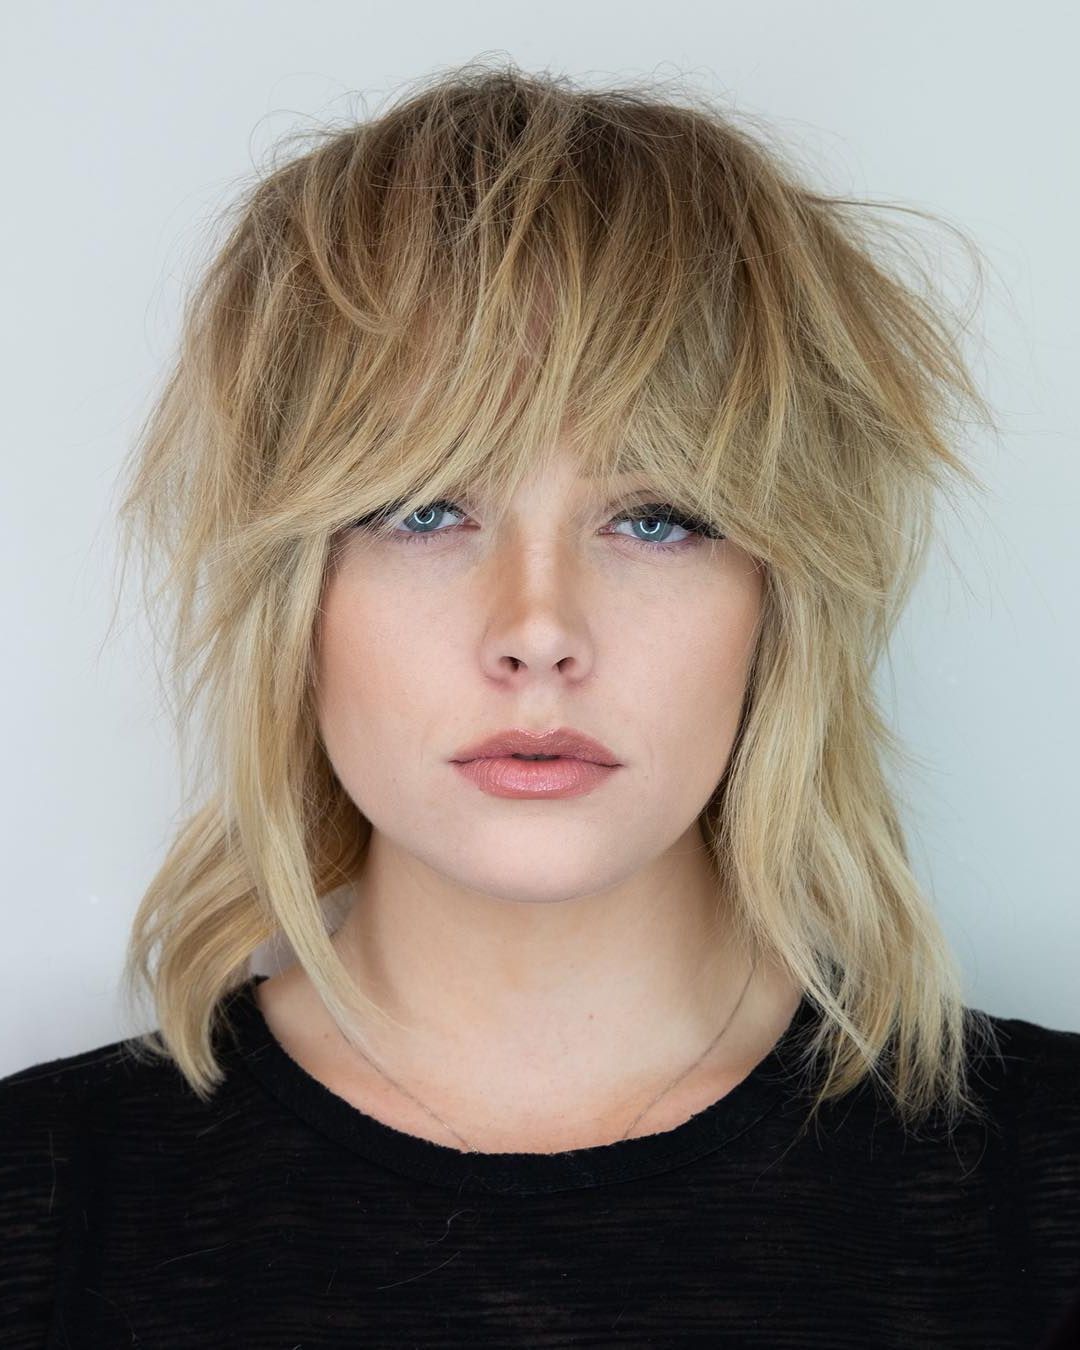 40 Modern Shag Haircuts For Women To Make A Splash With Regard To Famous Medium Shag Hairstyles With Long Side Bangs (View 17 of 20)